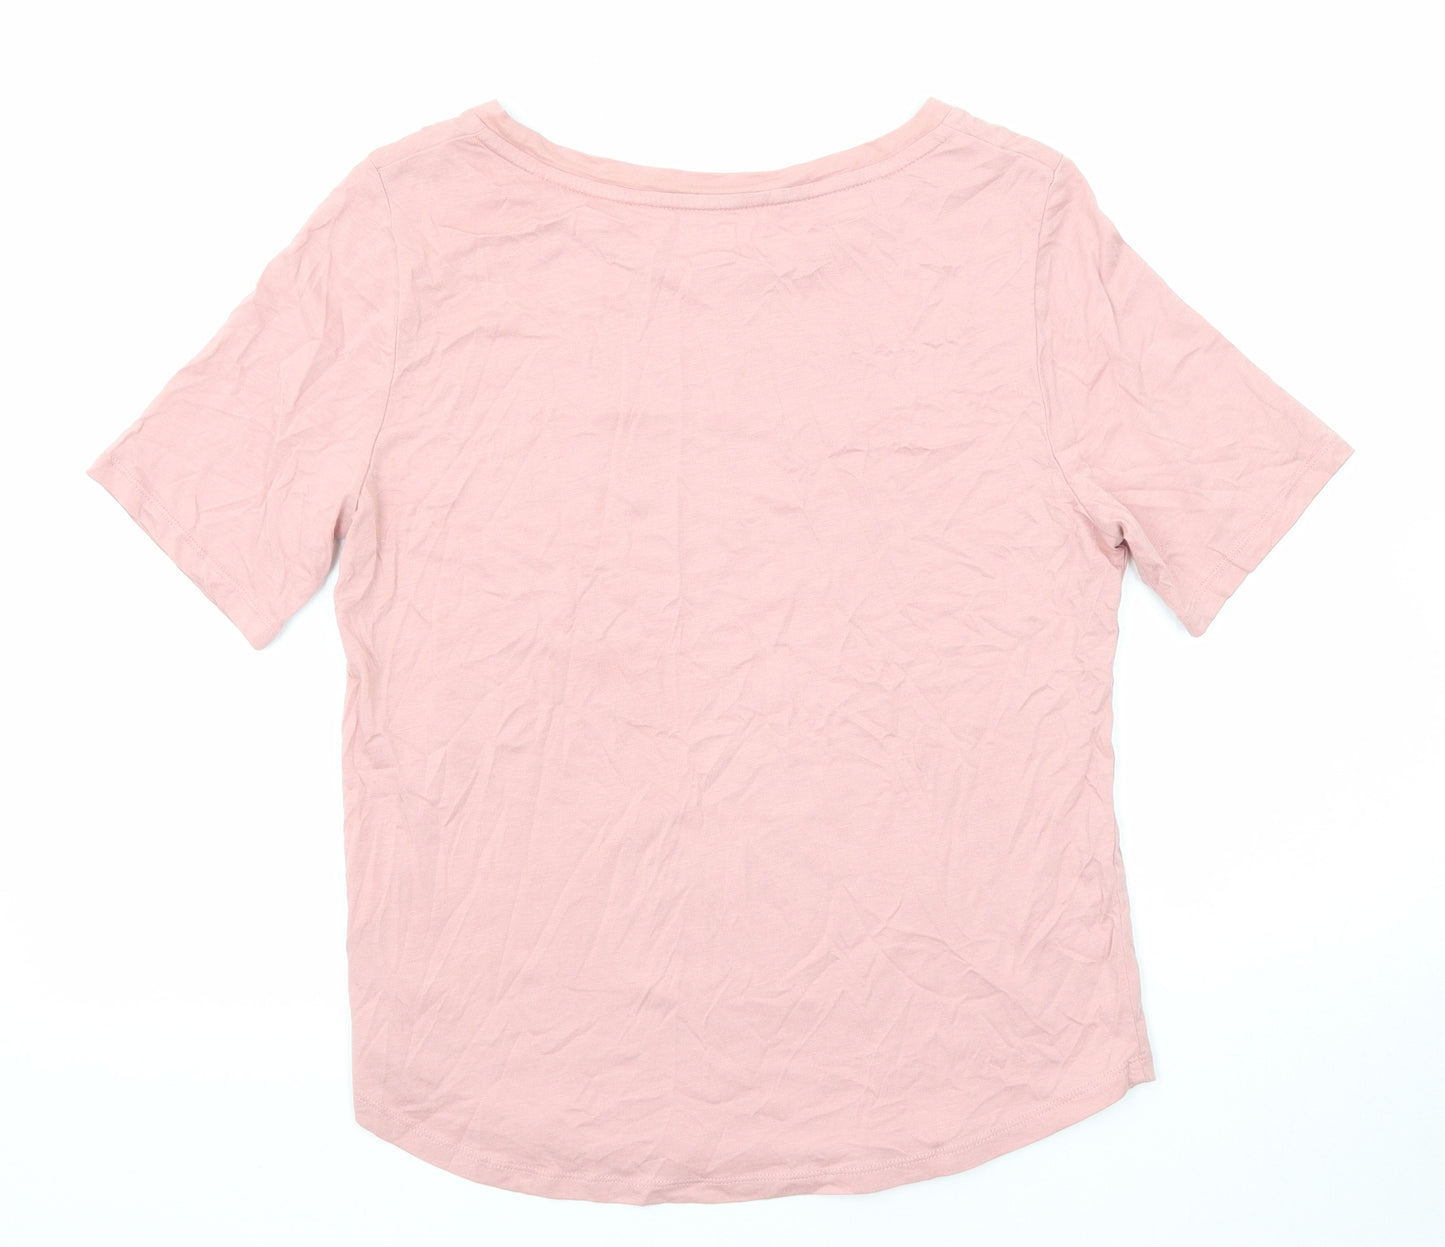 Marks and Spencer Womens Pink Cotton Basic T-Shirt Size 10 Boat Neck